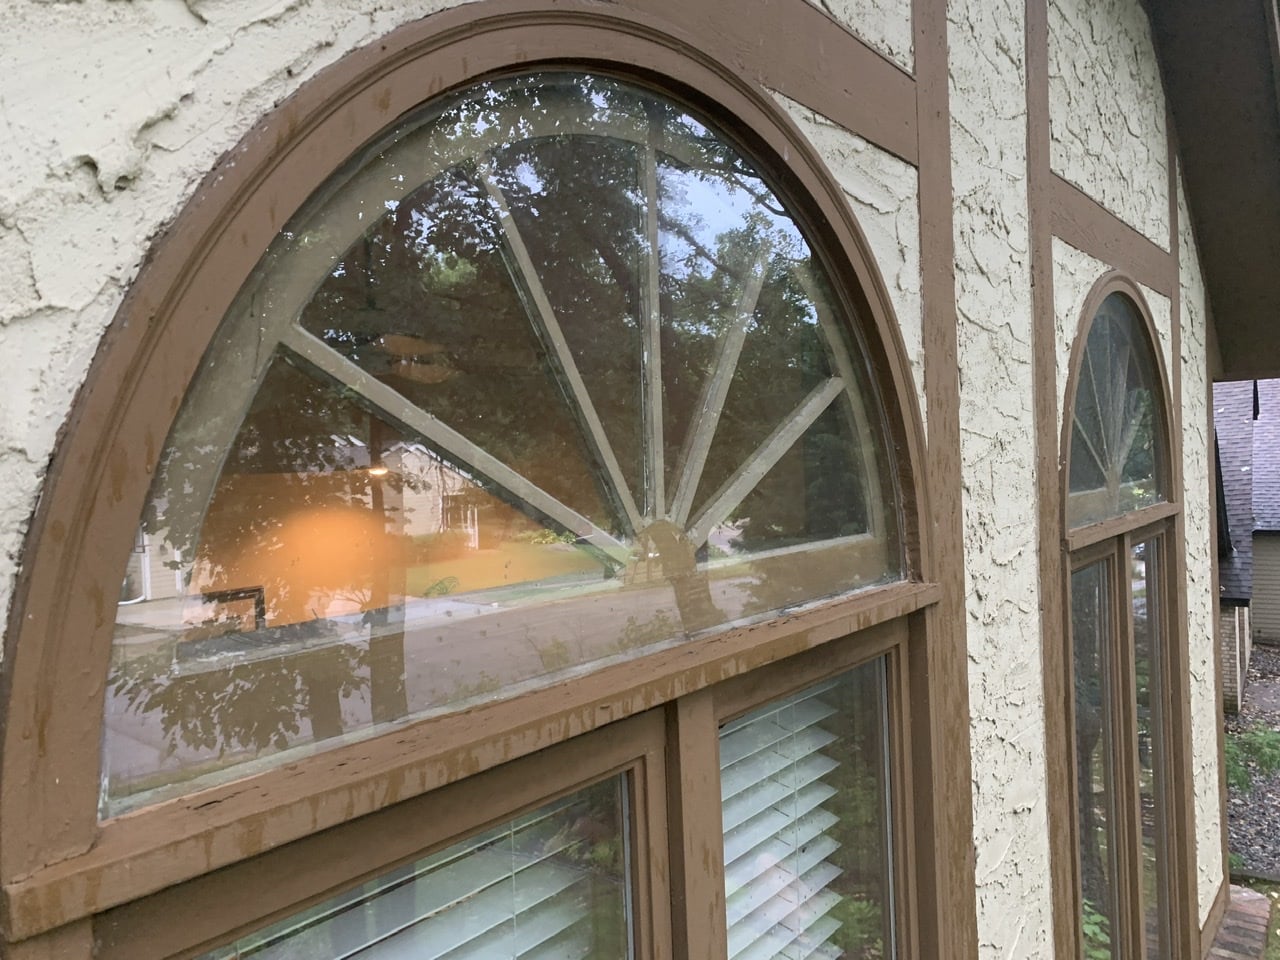 House windows that need replacement.